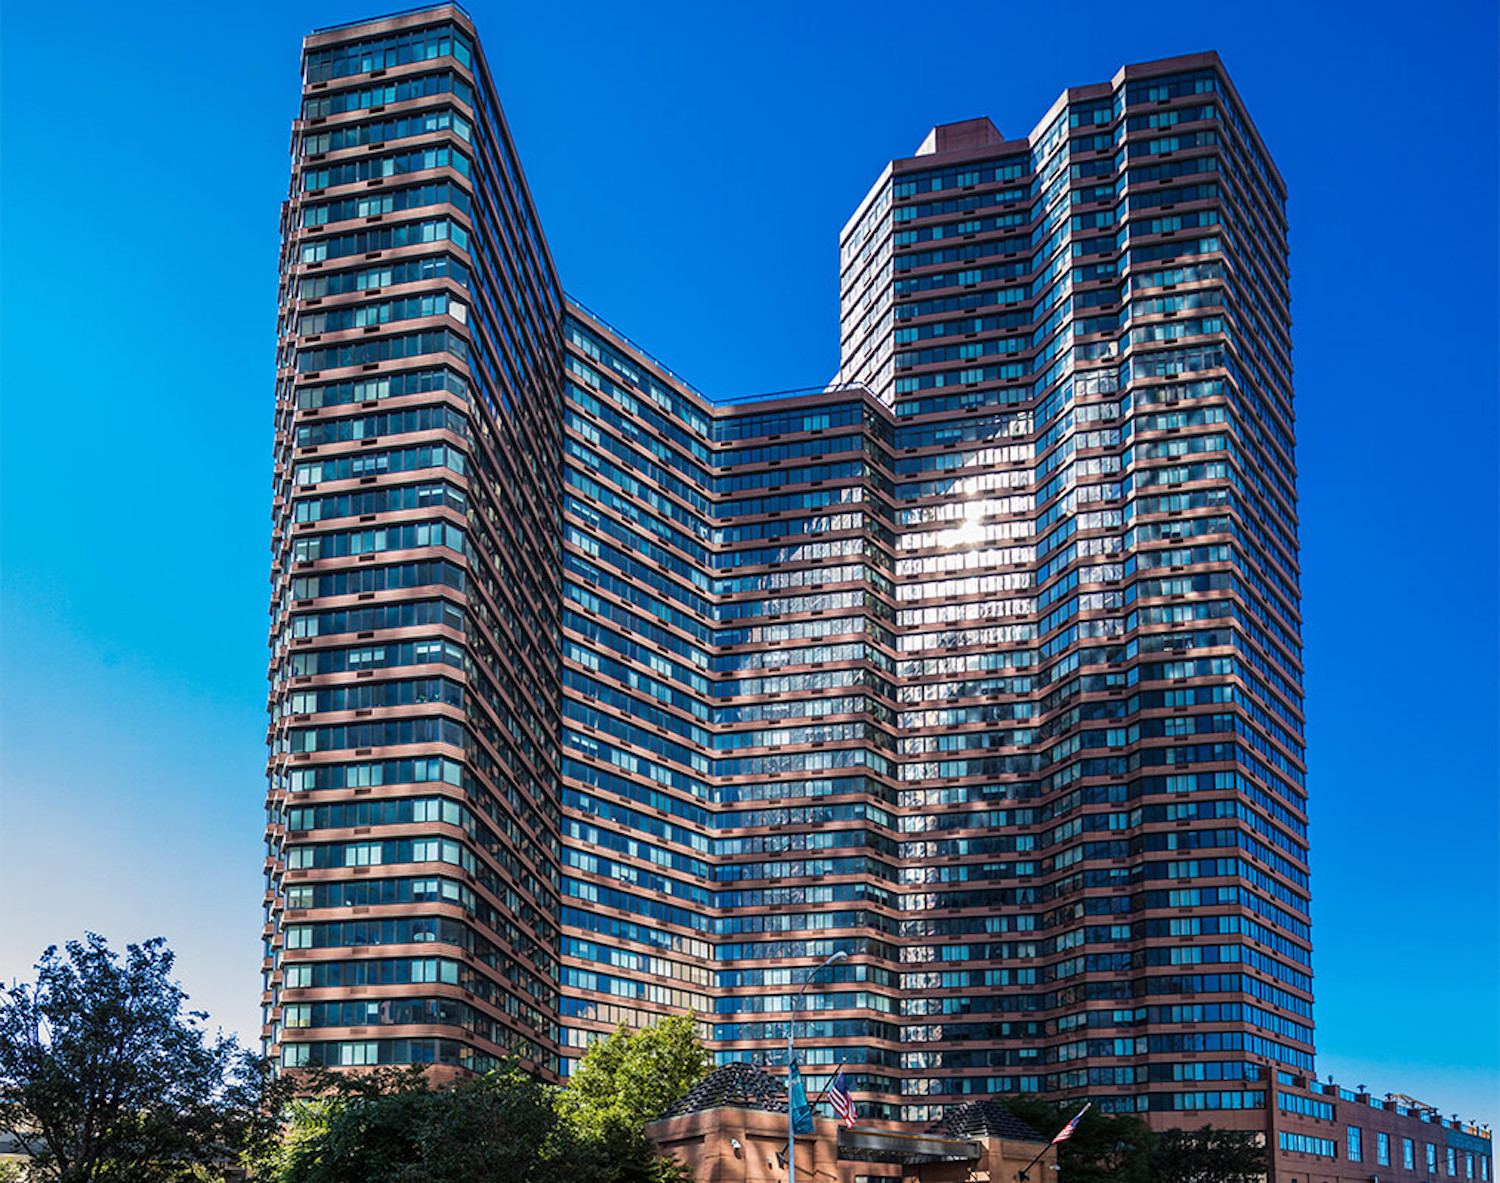 650 West 42nd Street Apartments. All images courtesy of NYC Housing Connect